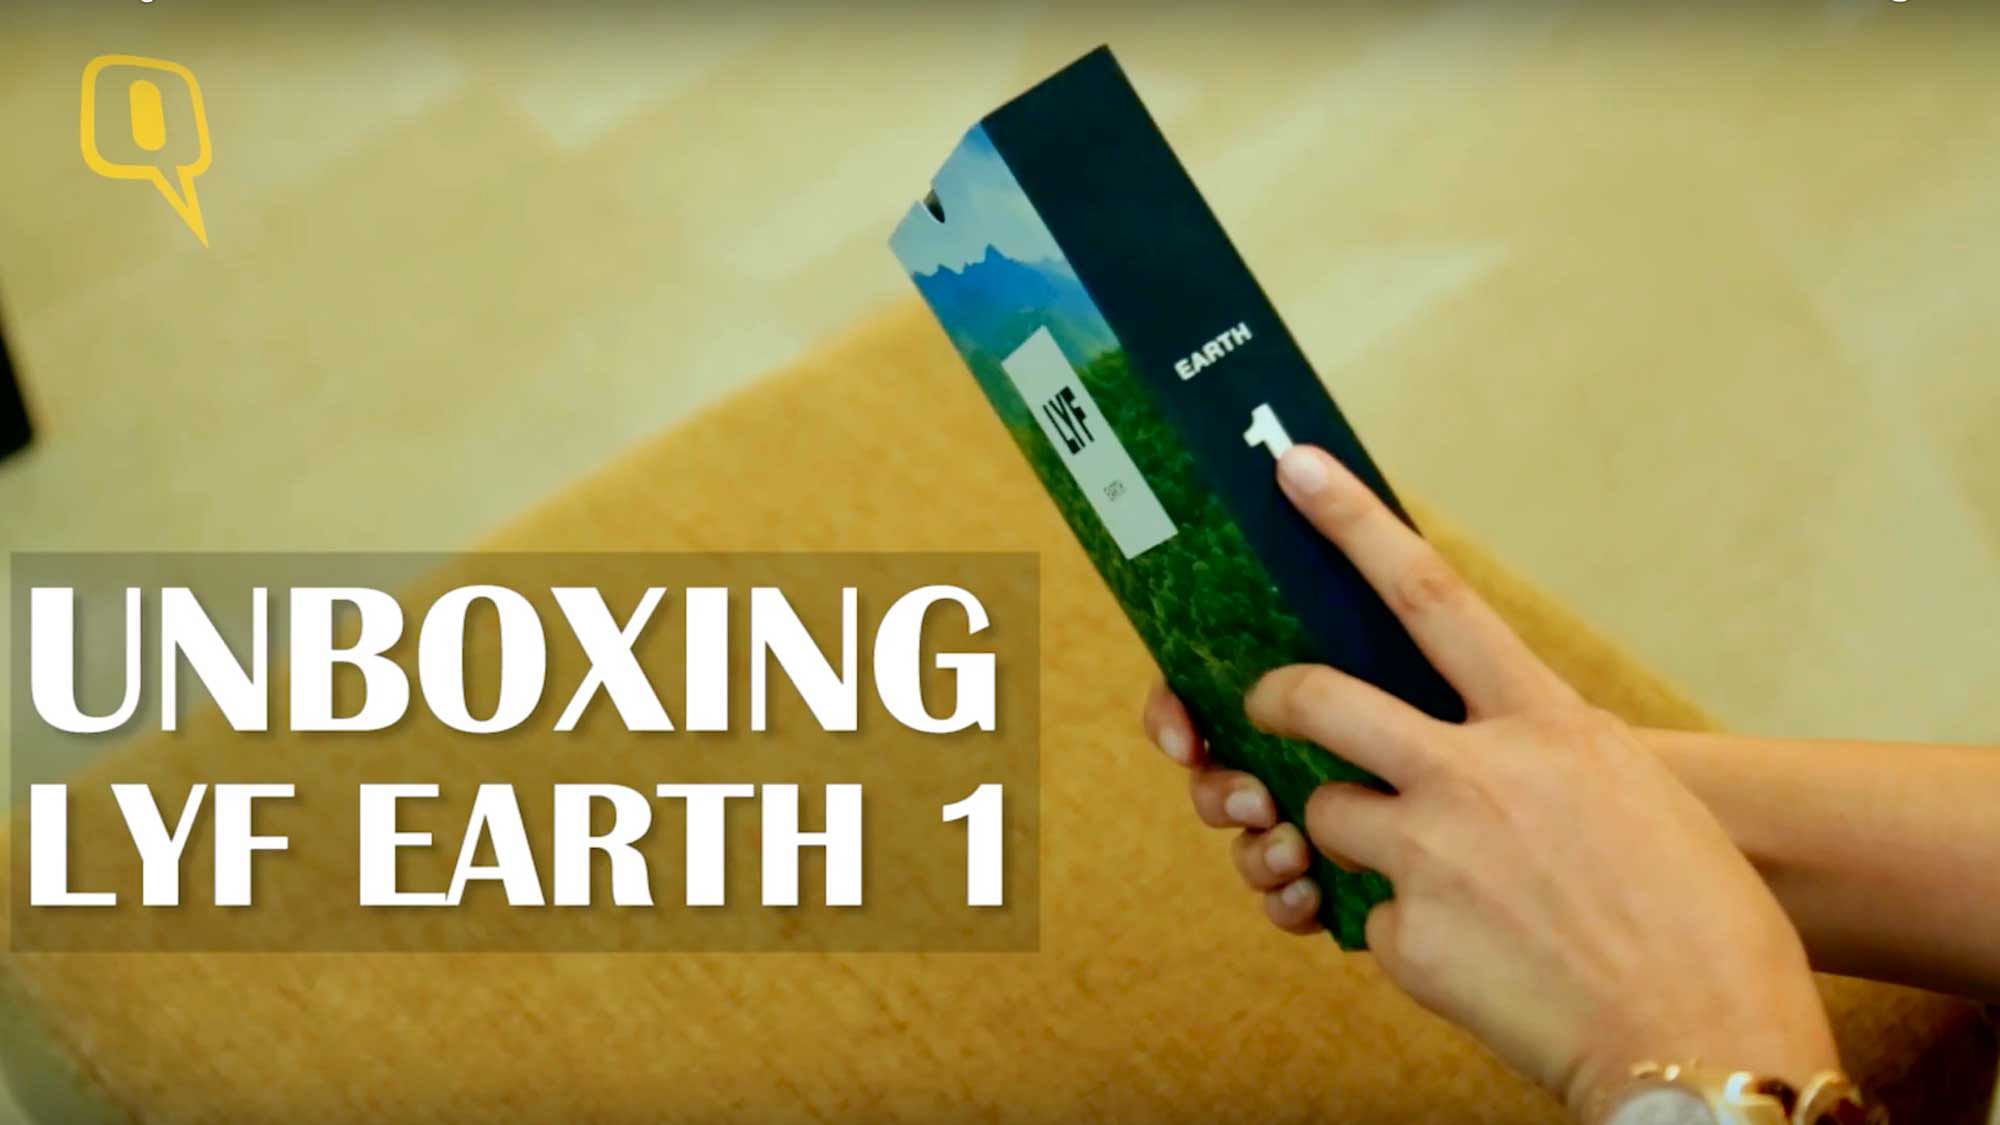 Reliance  upcoming smartphone LYF Earth 1 unboxed. (Photo: <b>The Quint</b>)